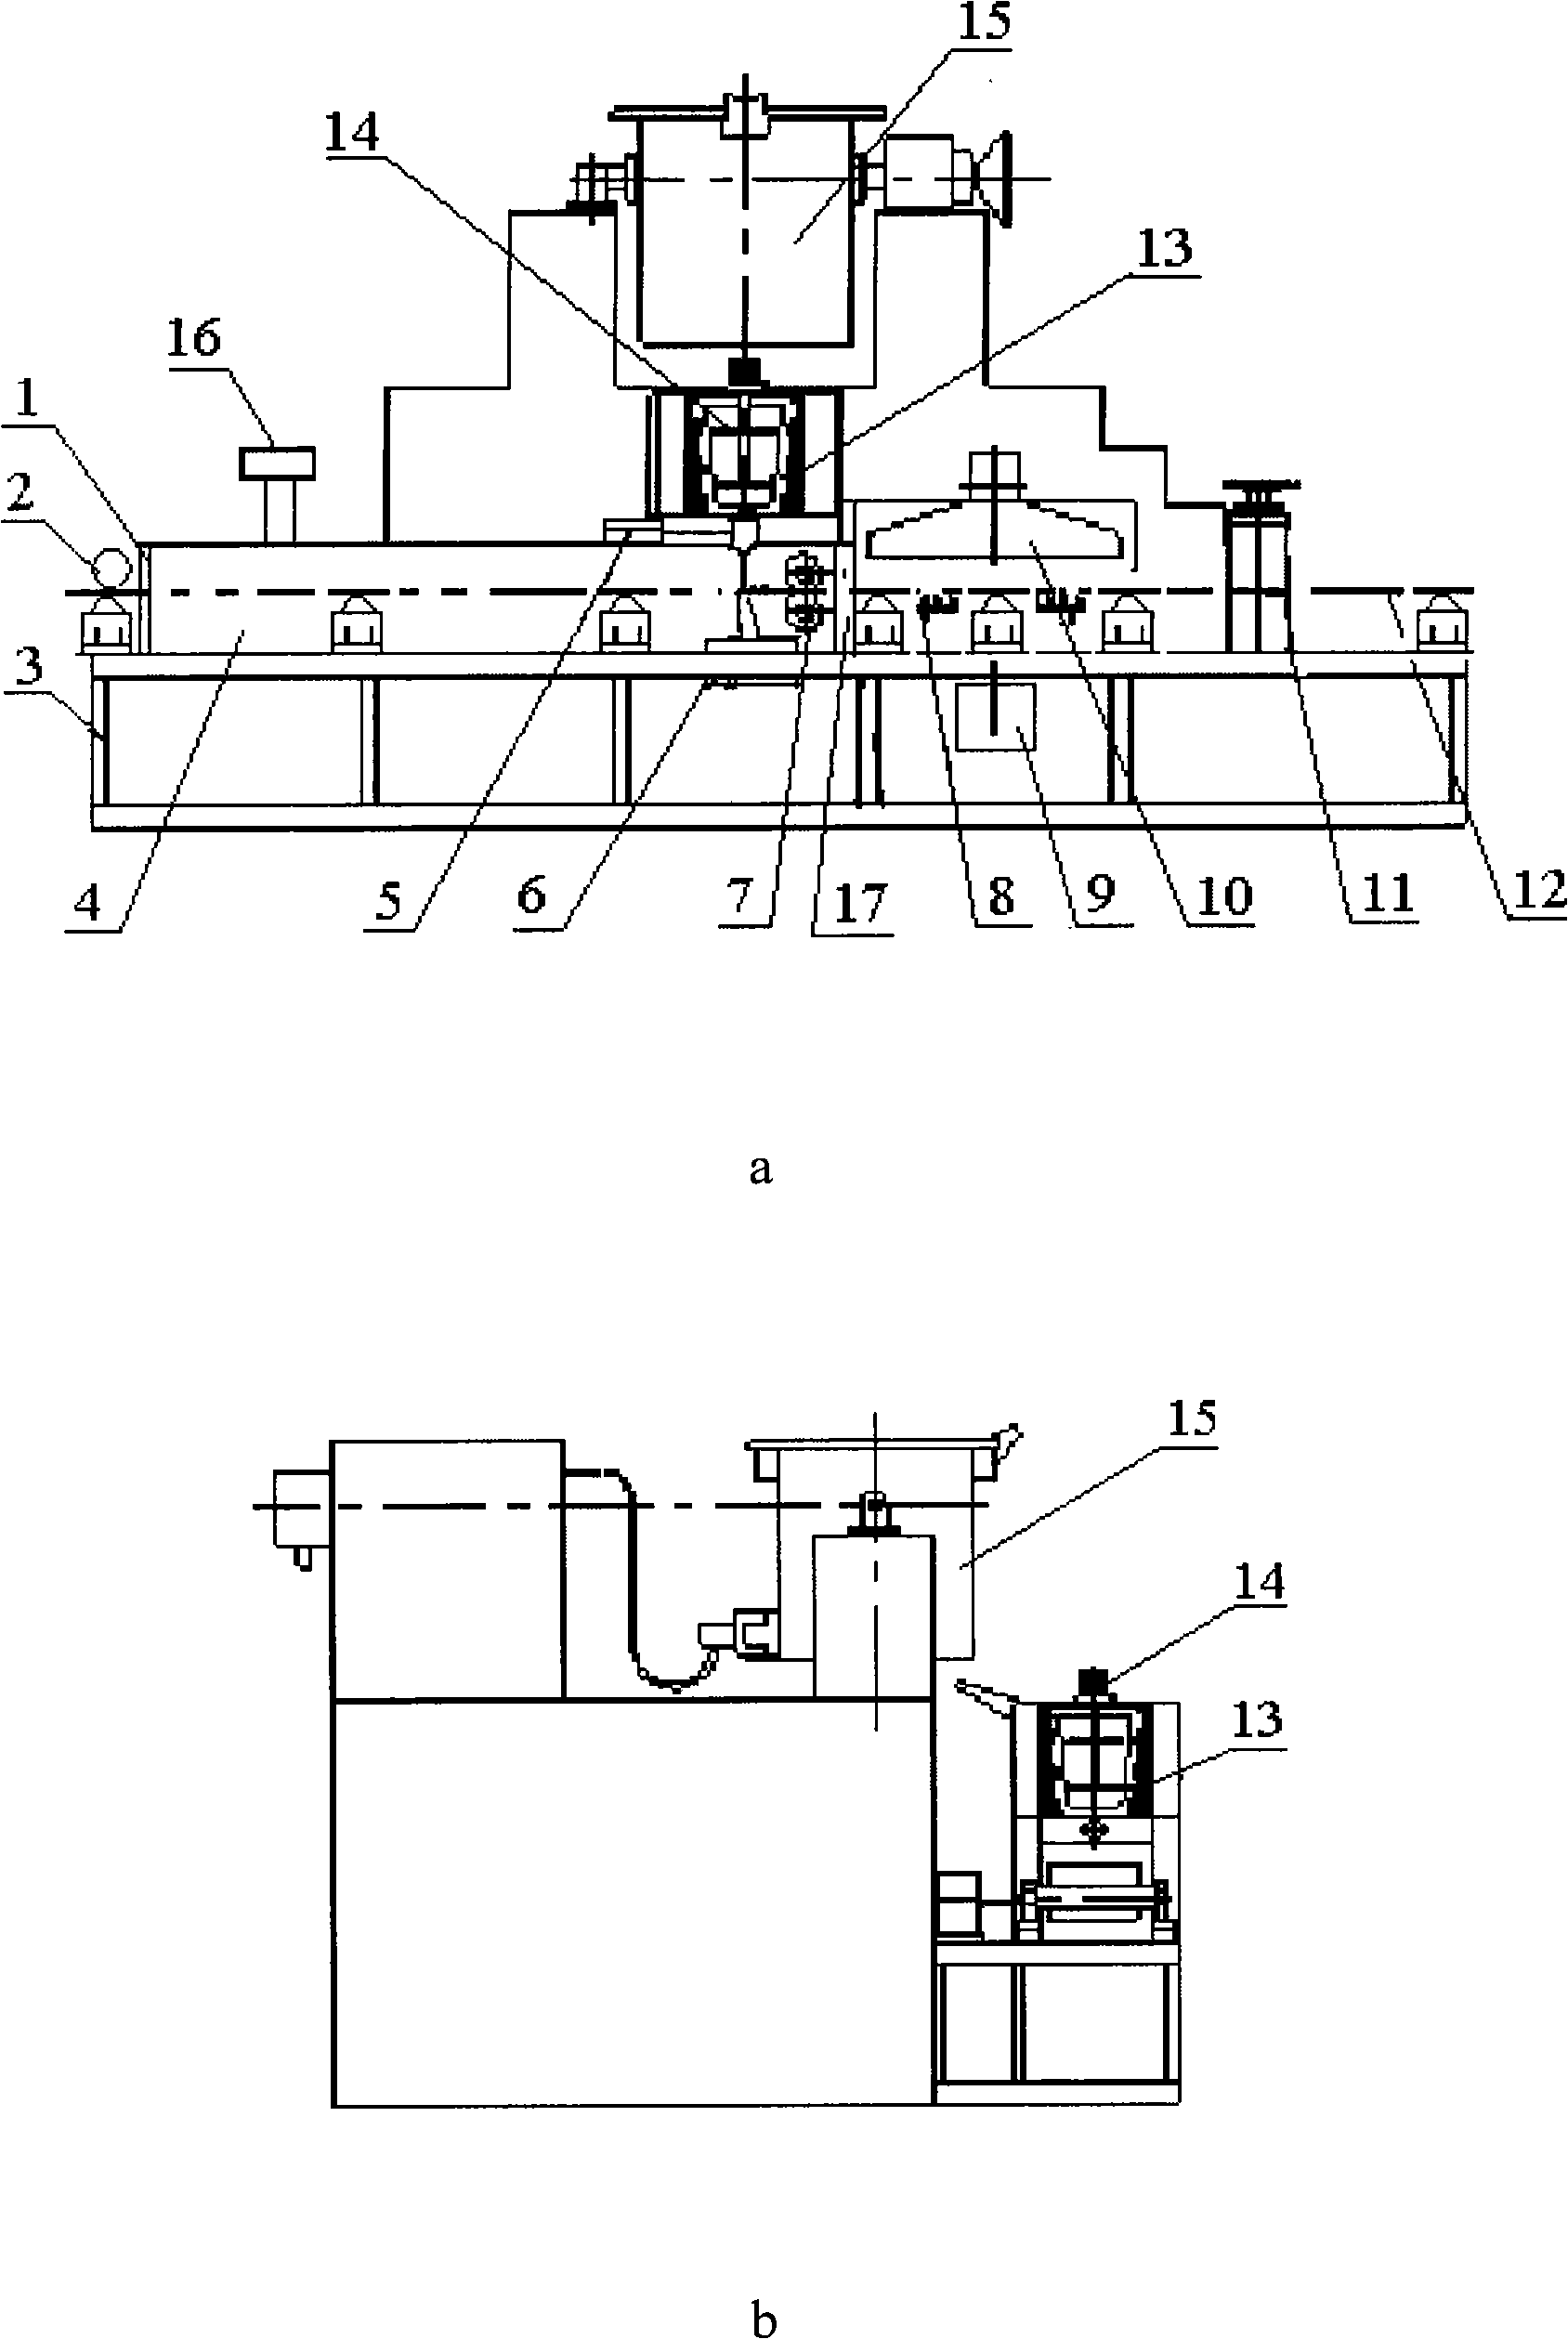 Continuous casting heat composite apparatus and method for preparing copper lead alloy-steel shaft bushing material